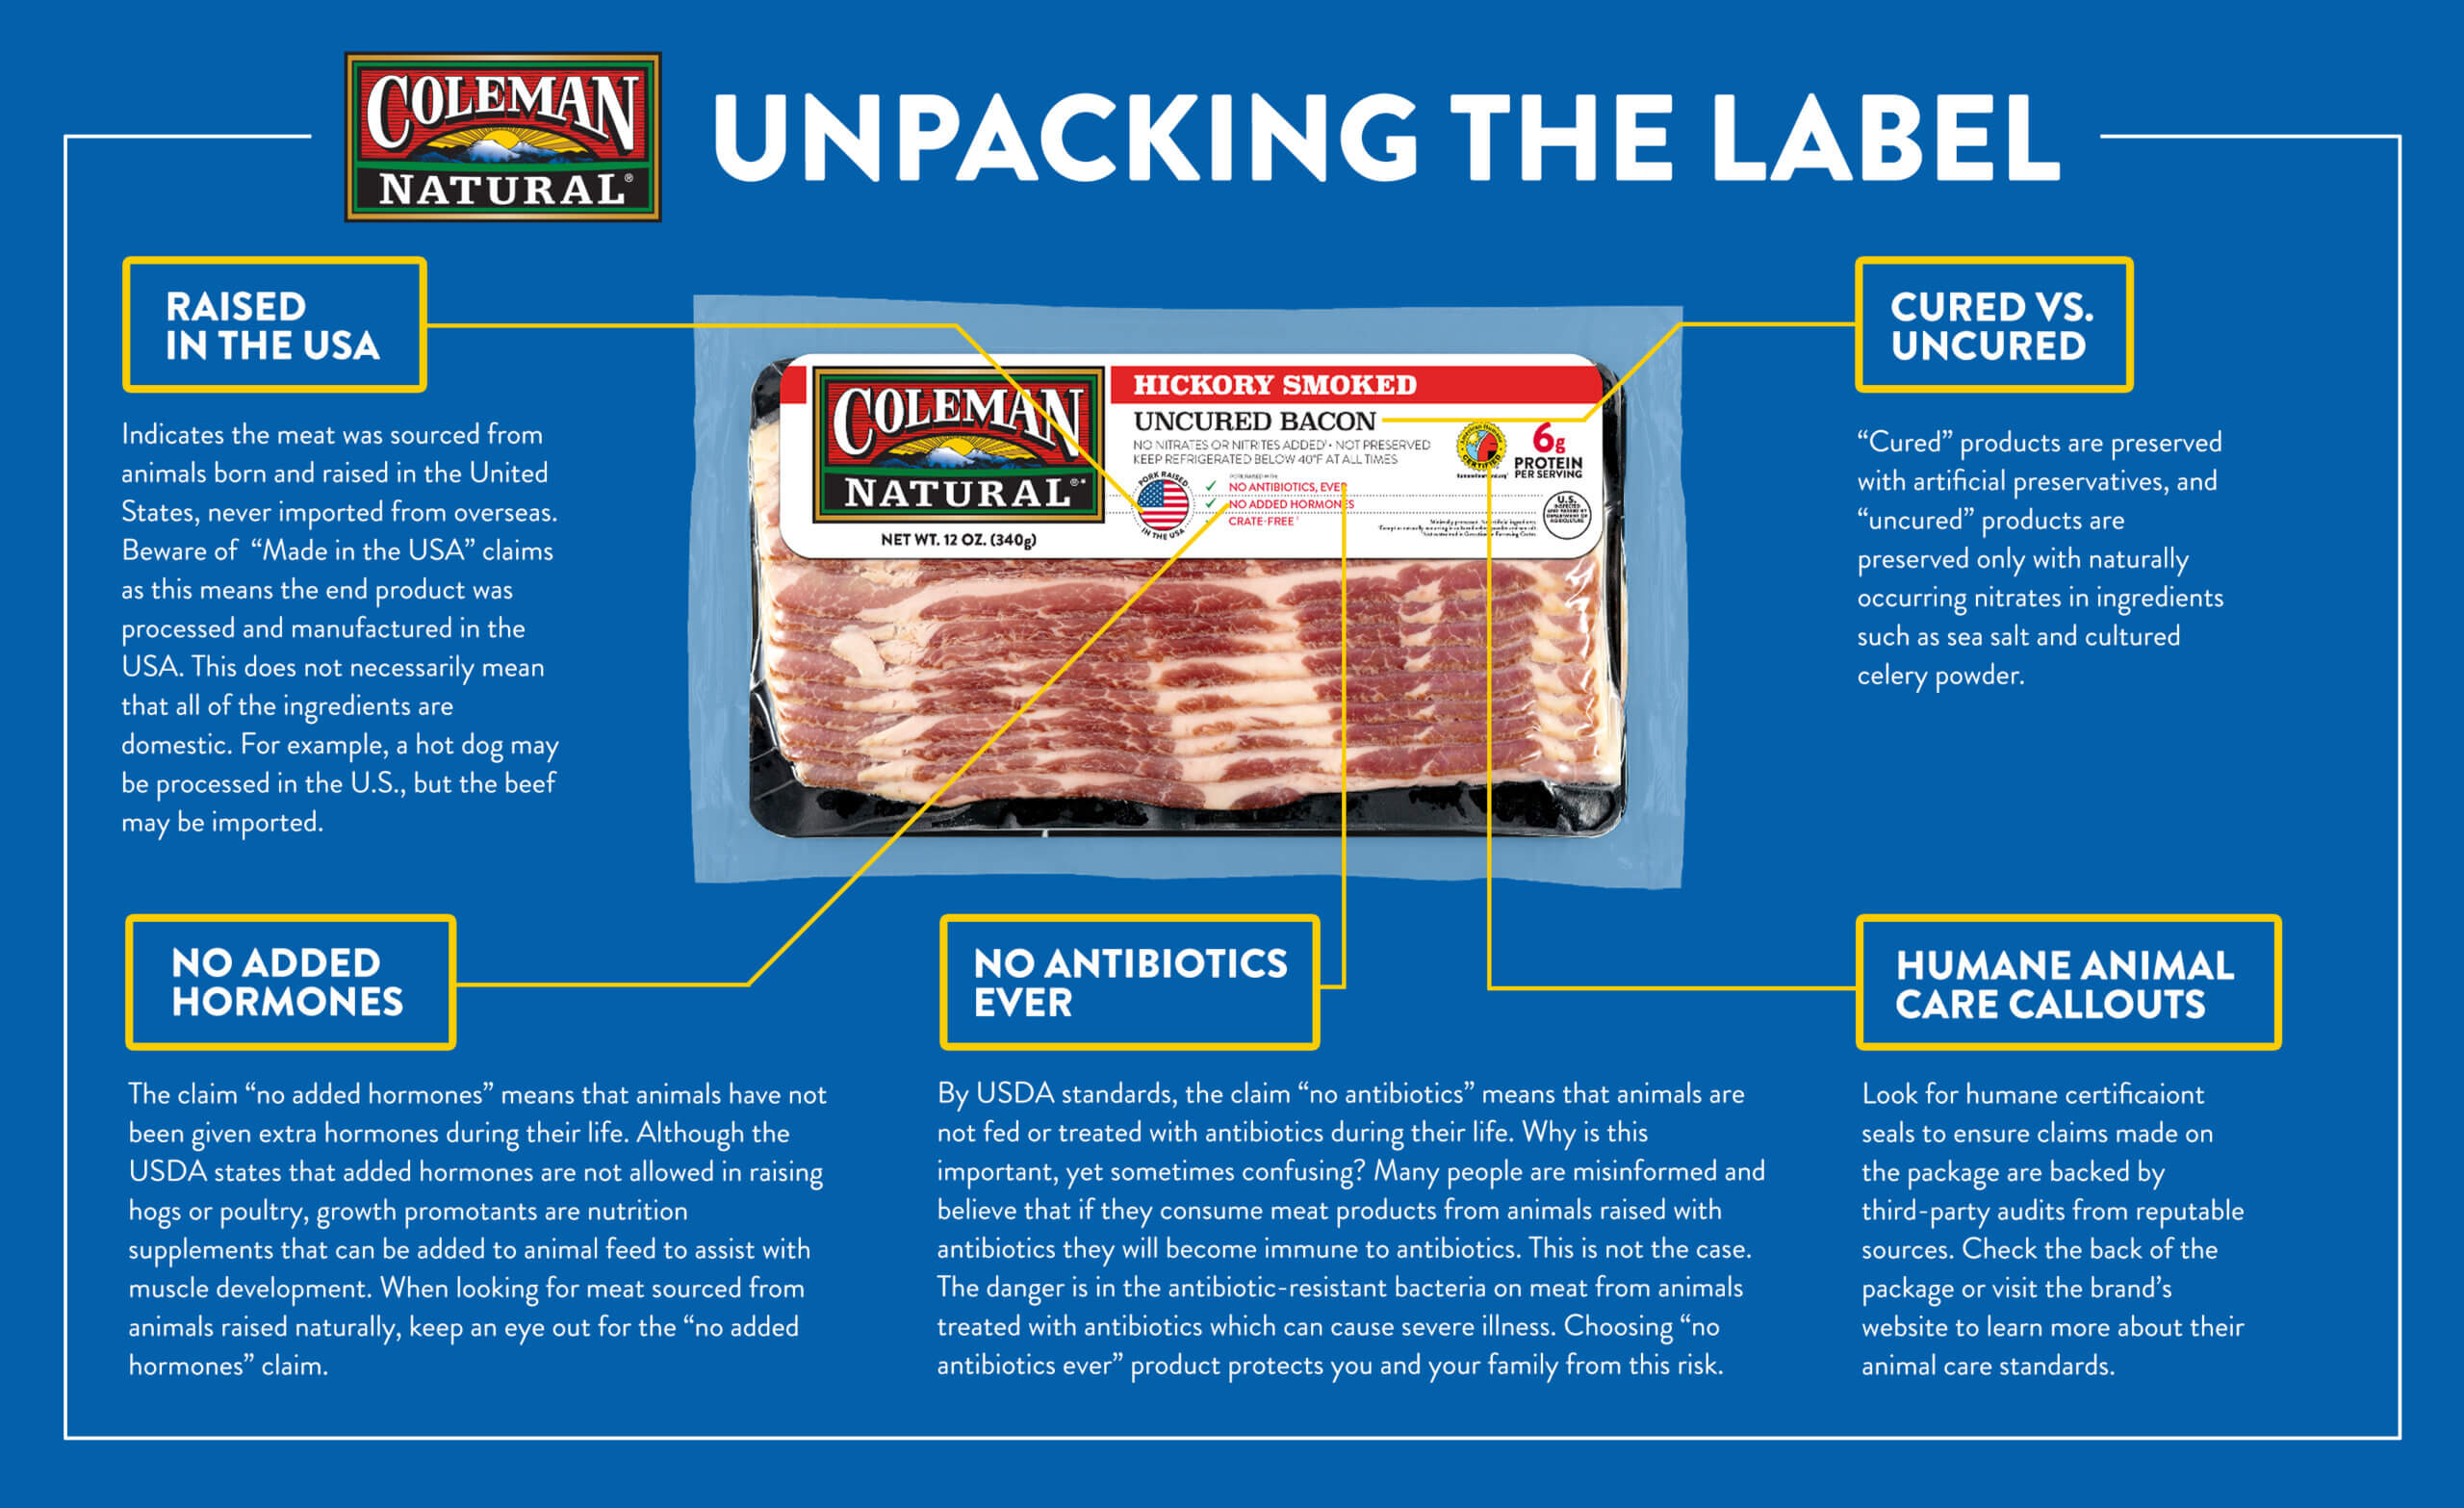 Meat label claims and callouts shown with actual package